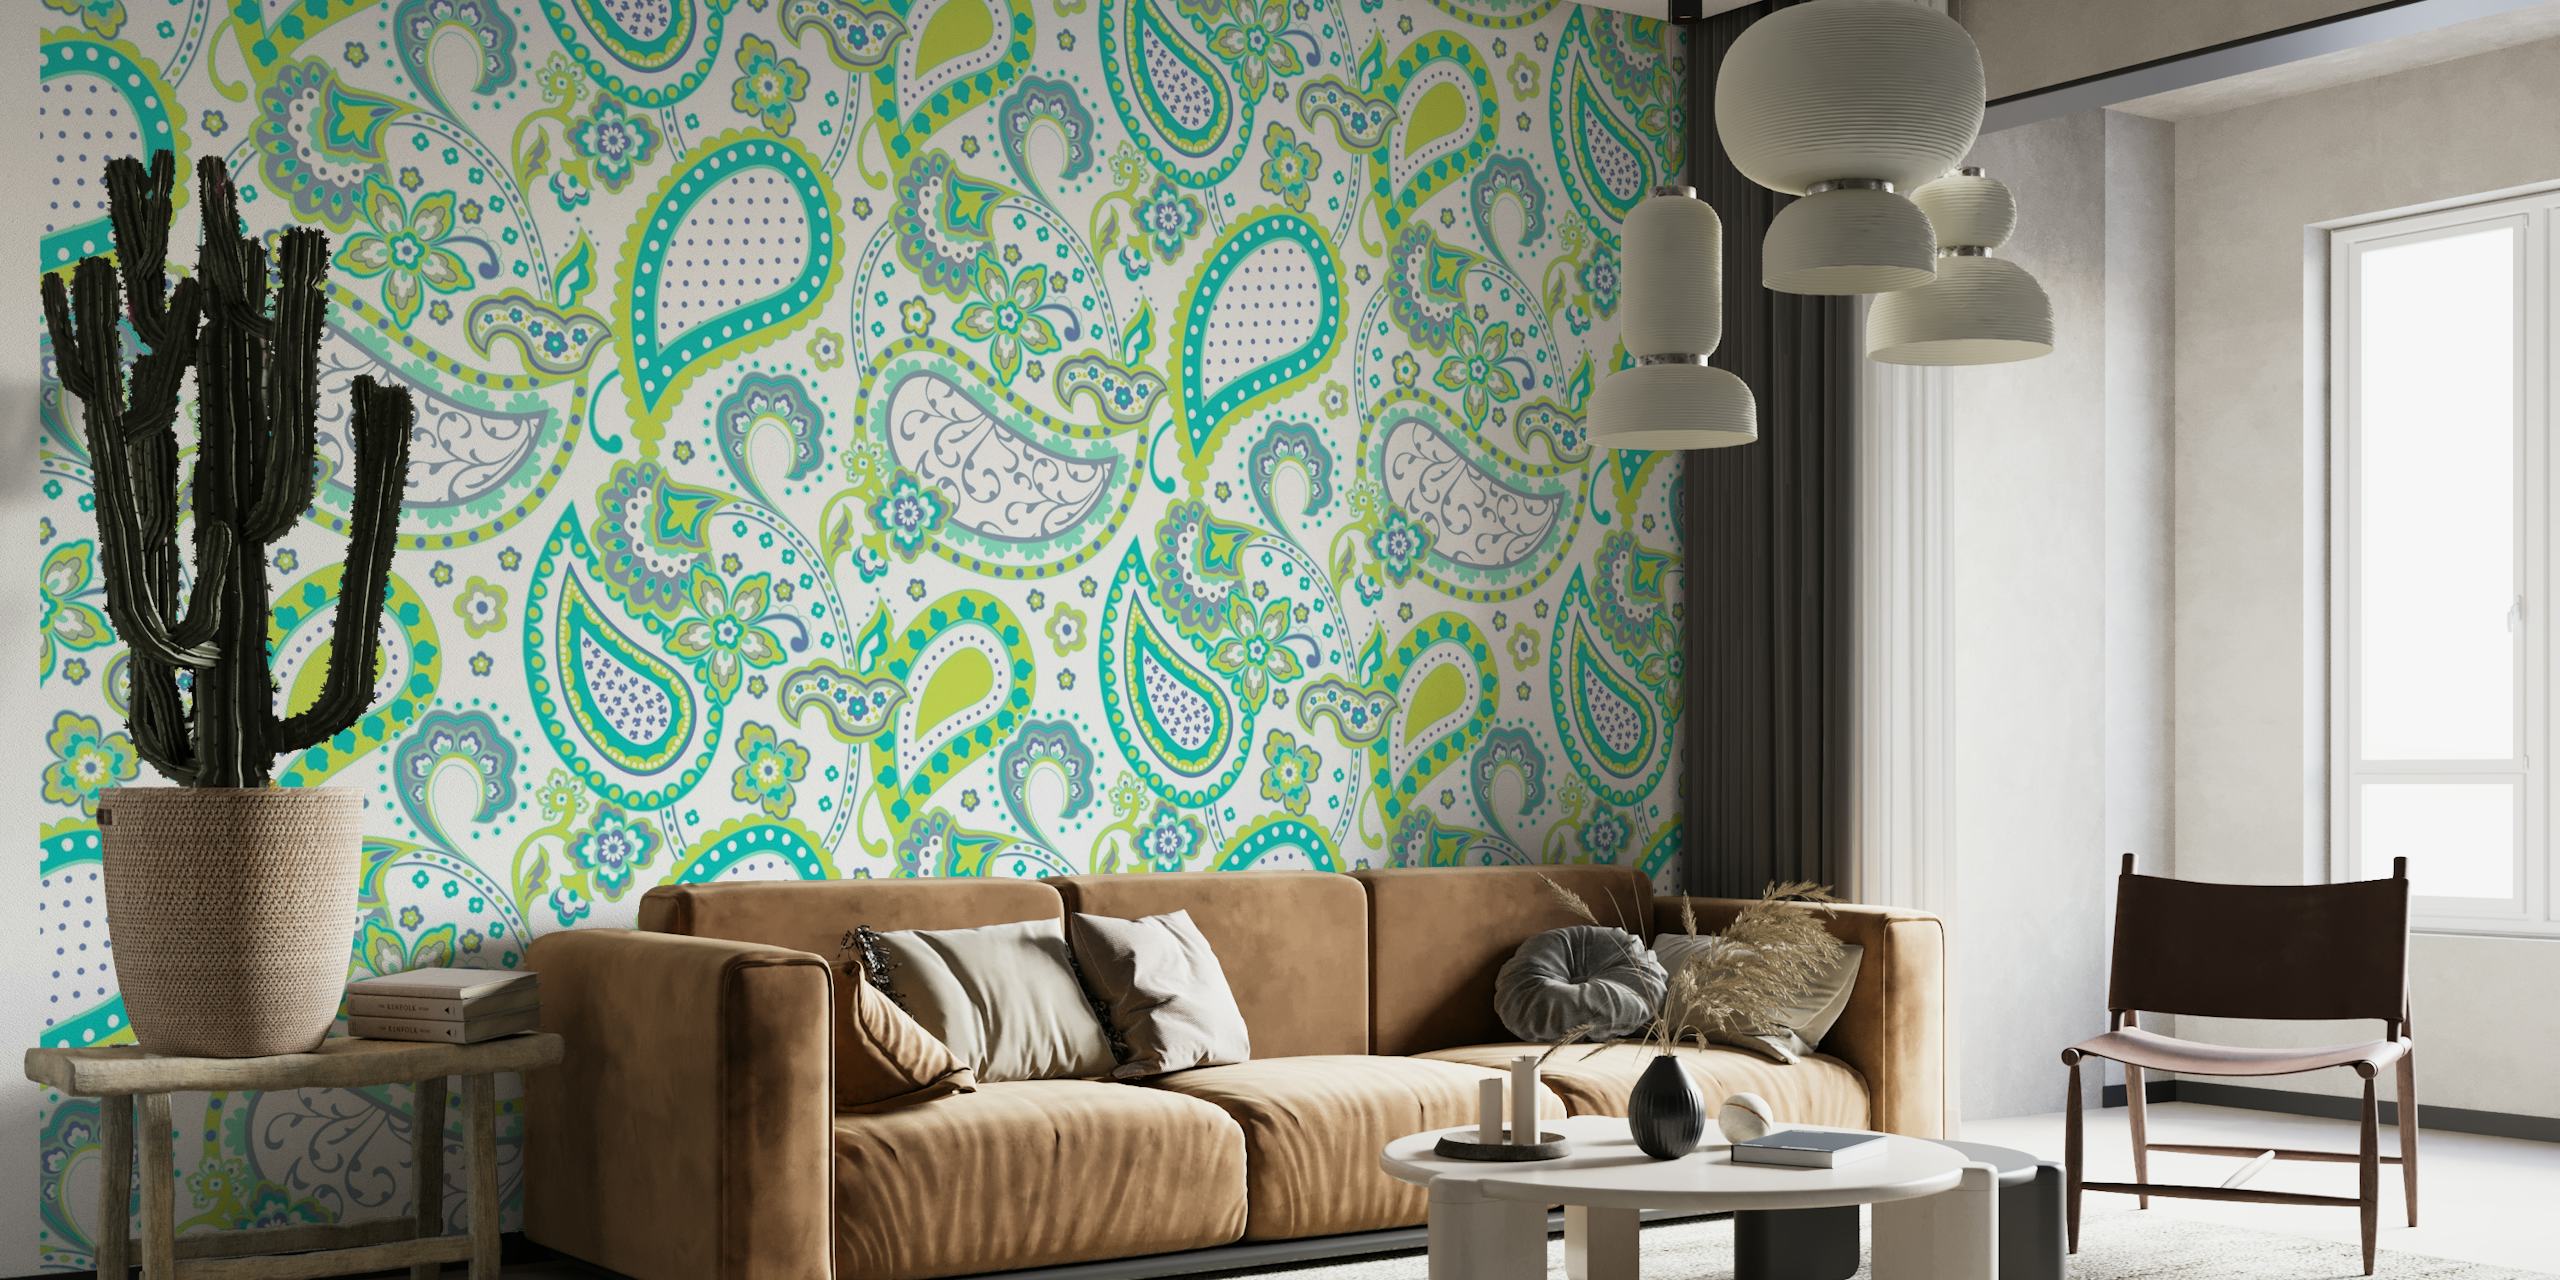 Green, white, and blue paisley pattern wall mural